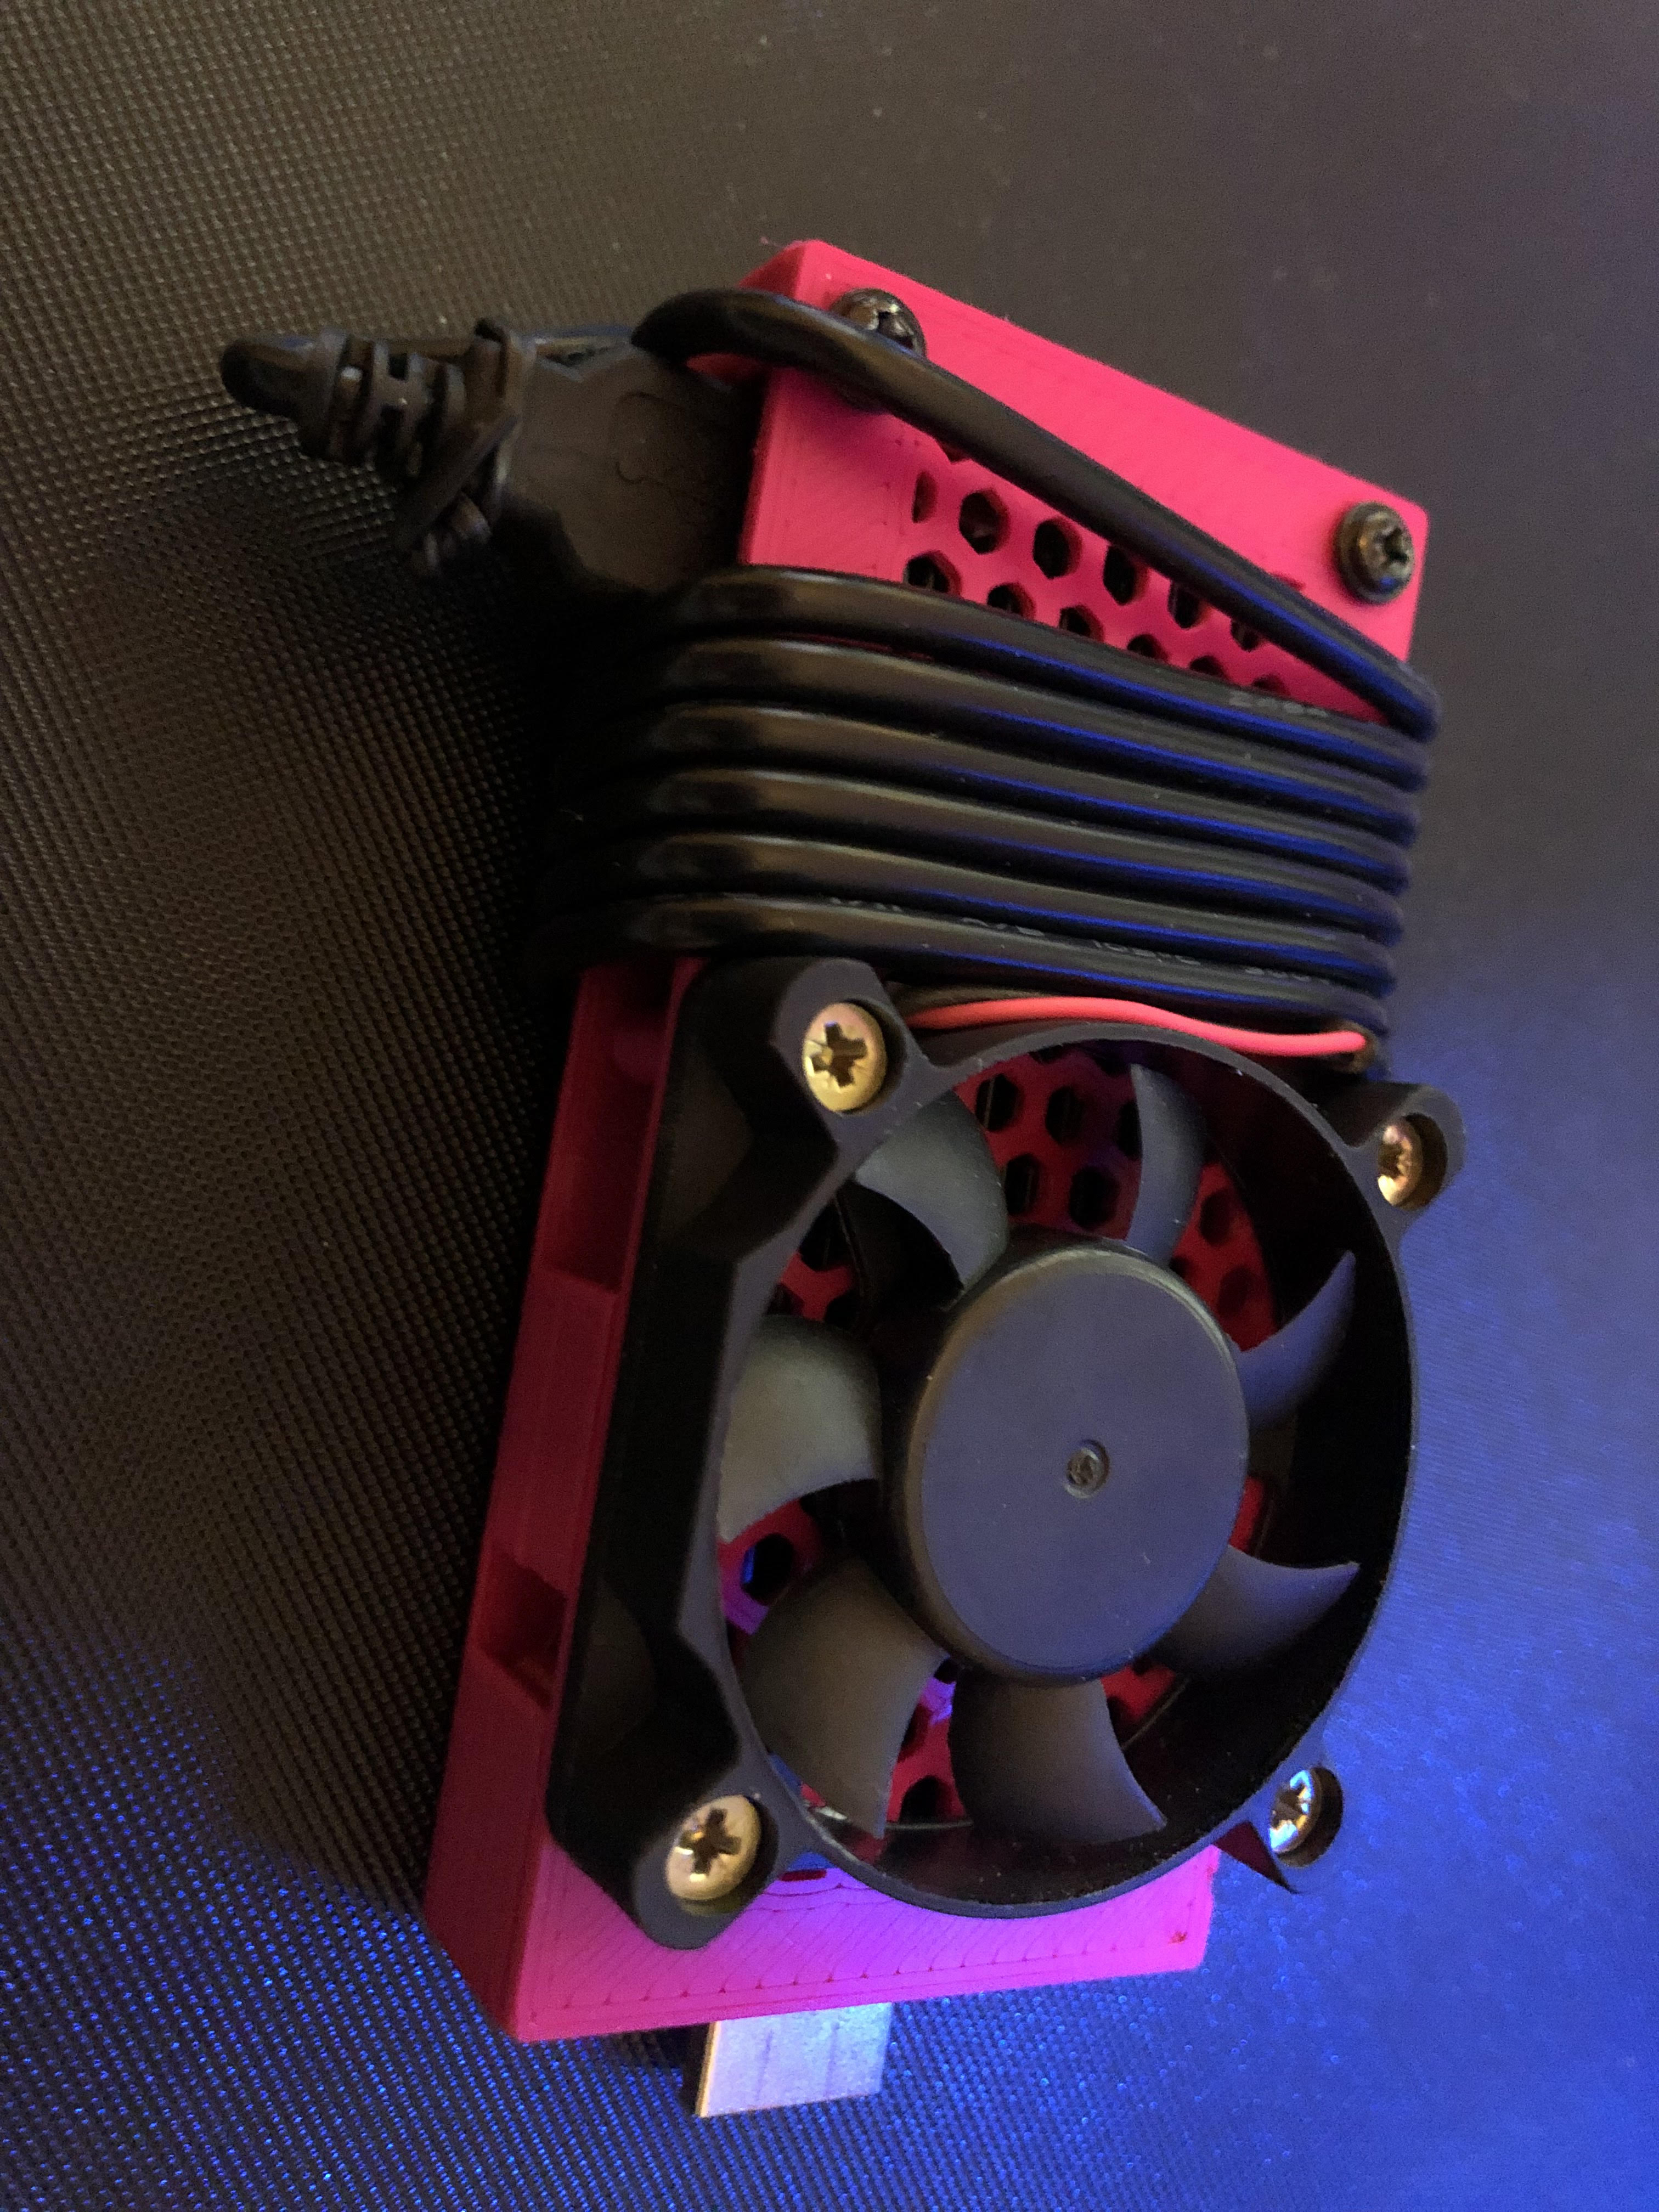 T6 Intel Compute Stick case for active cooling